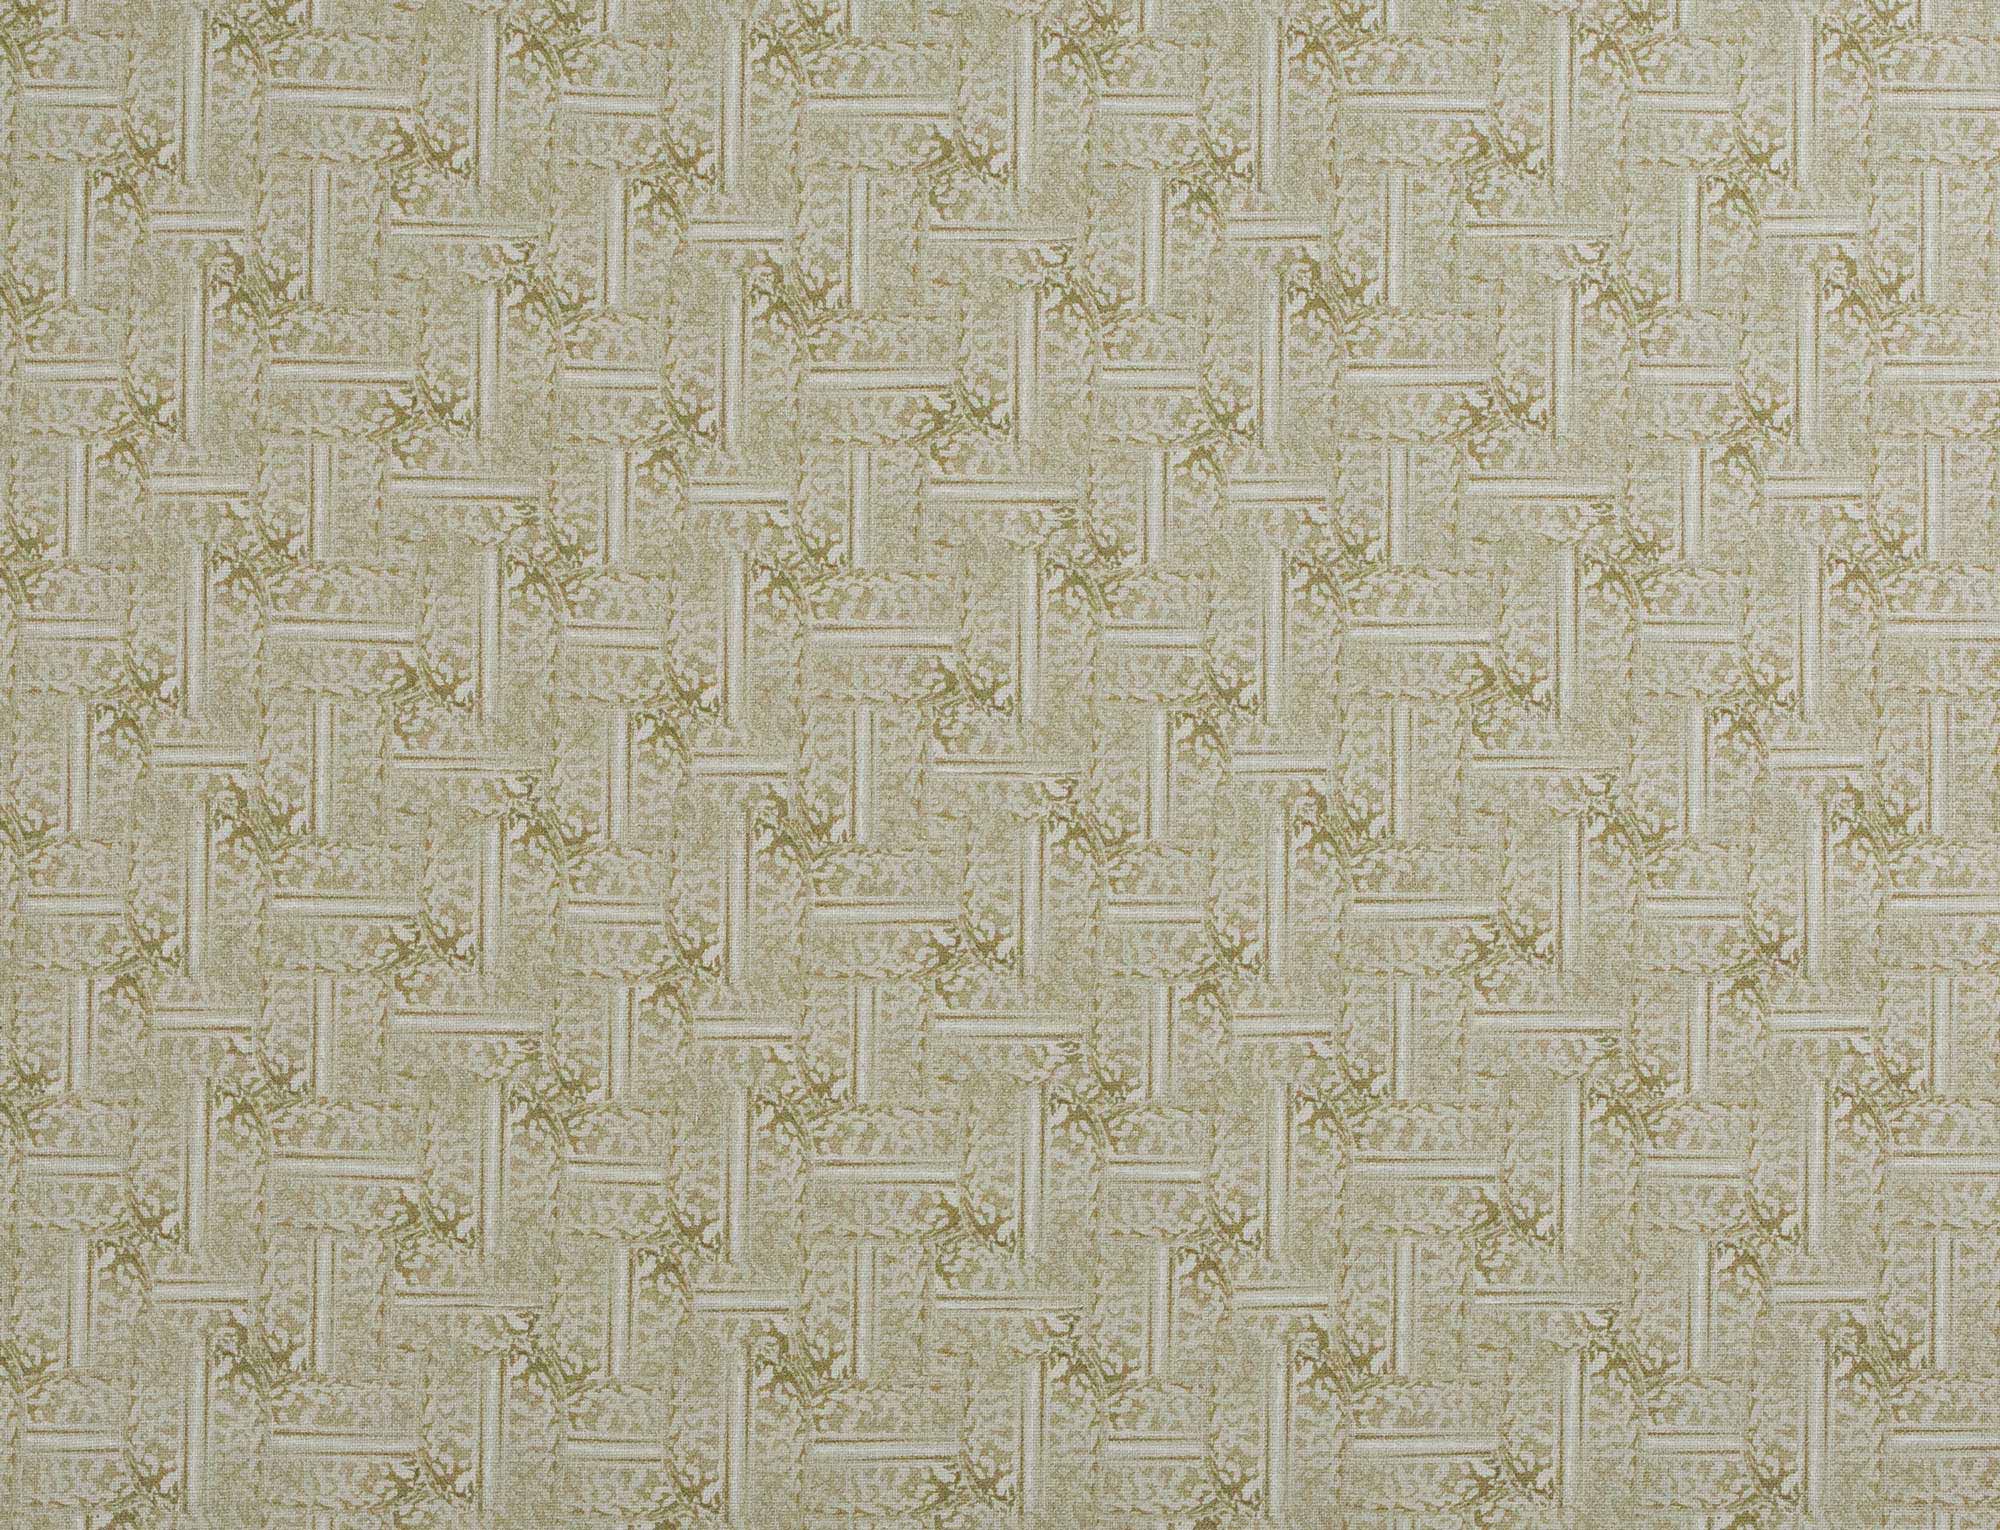 Detail of fabric in a geometric grid pattern in olive on a greige field.